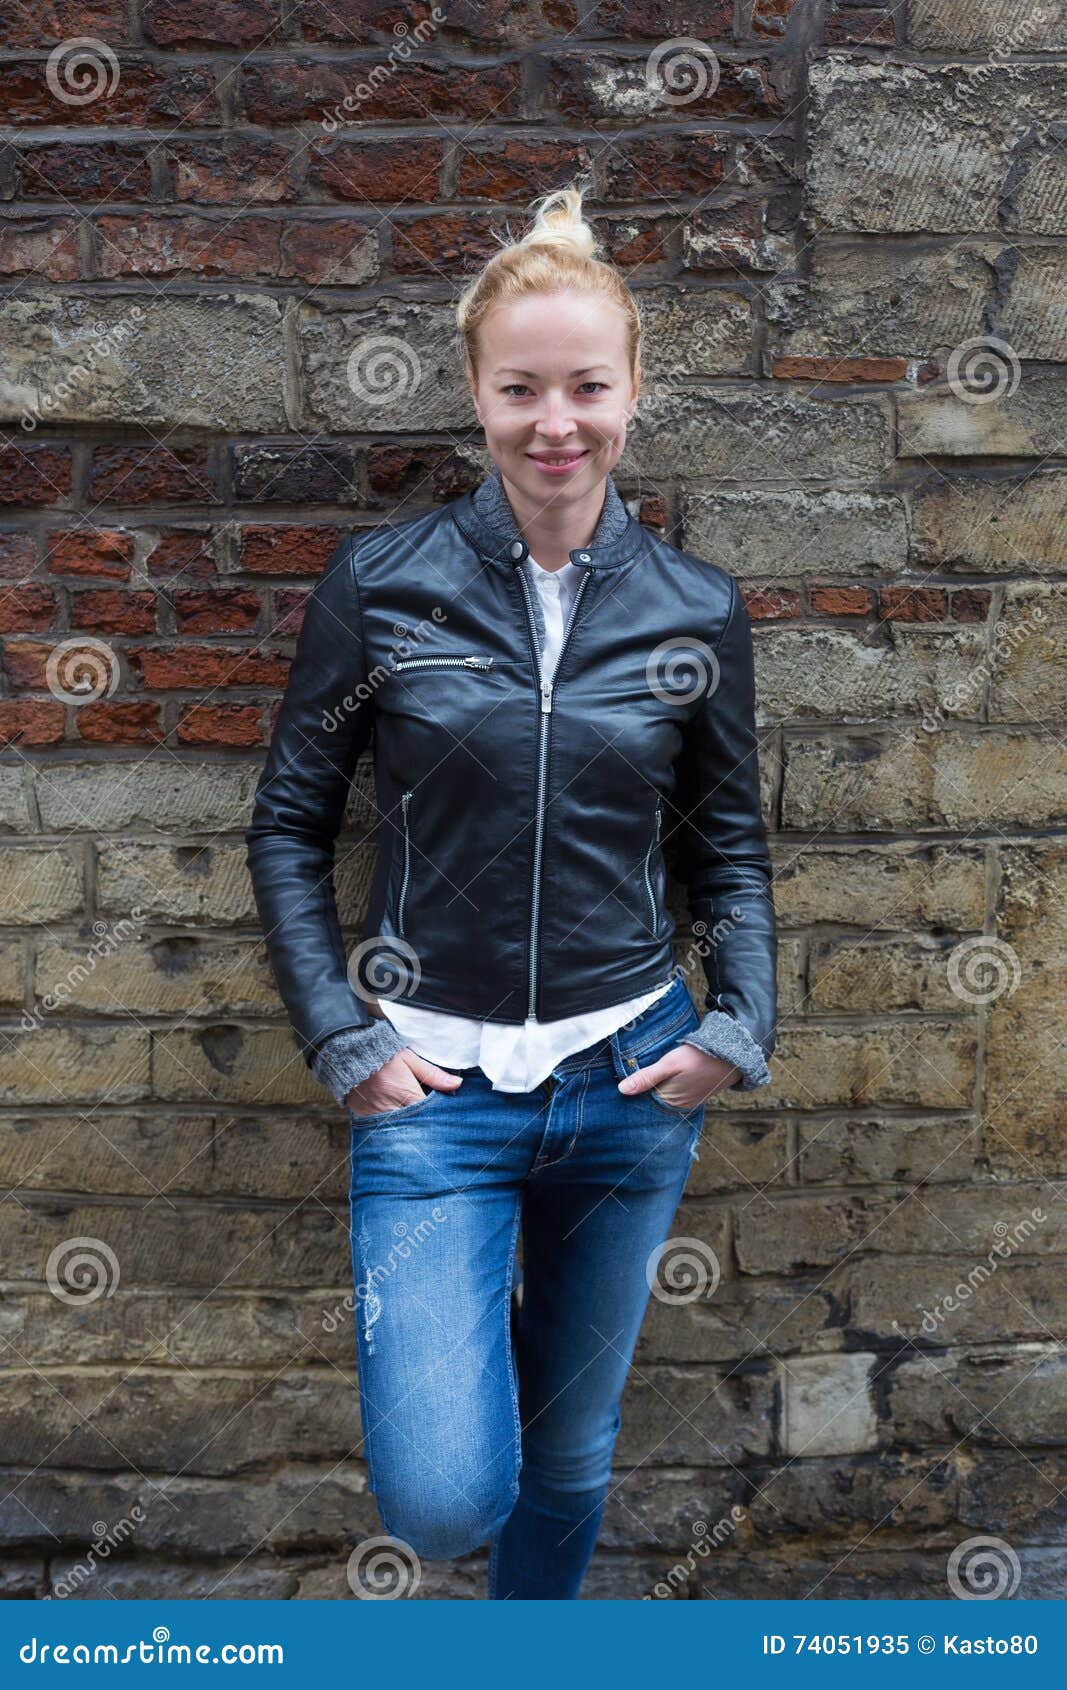 fashion street style portrait of young woman.